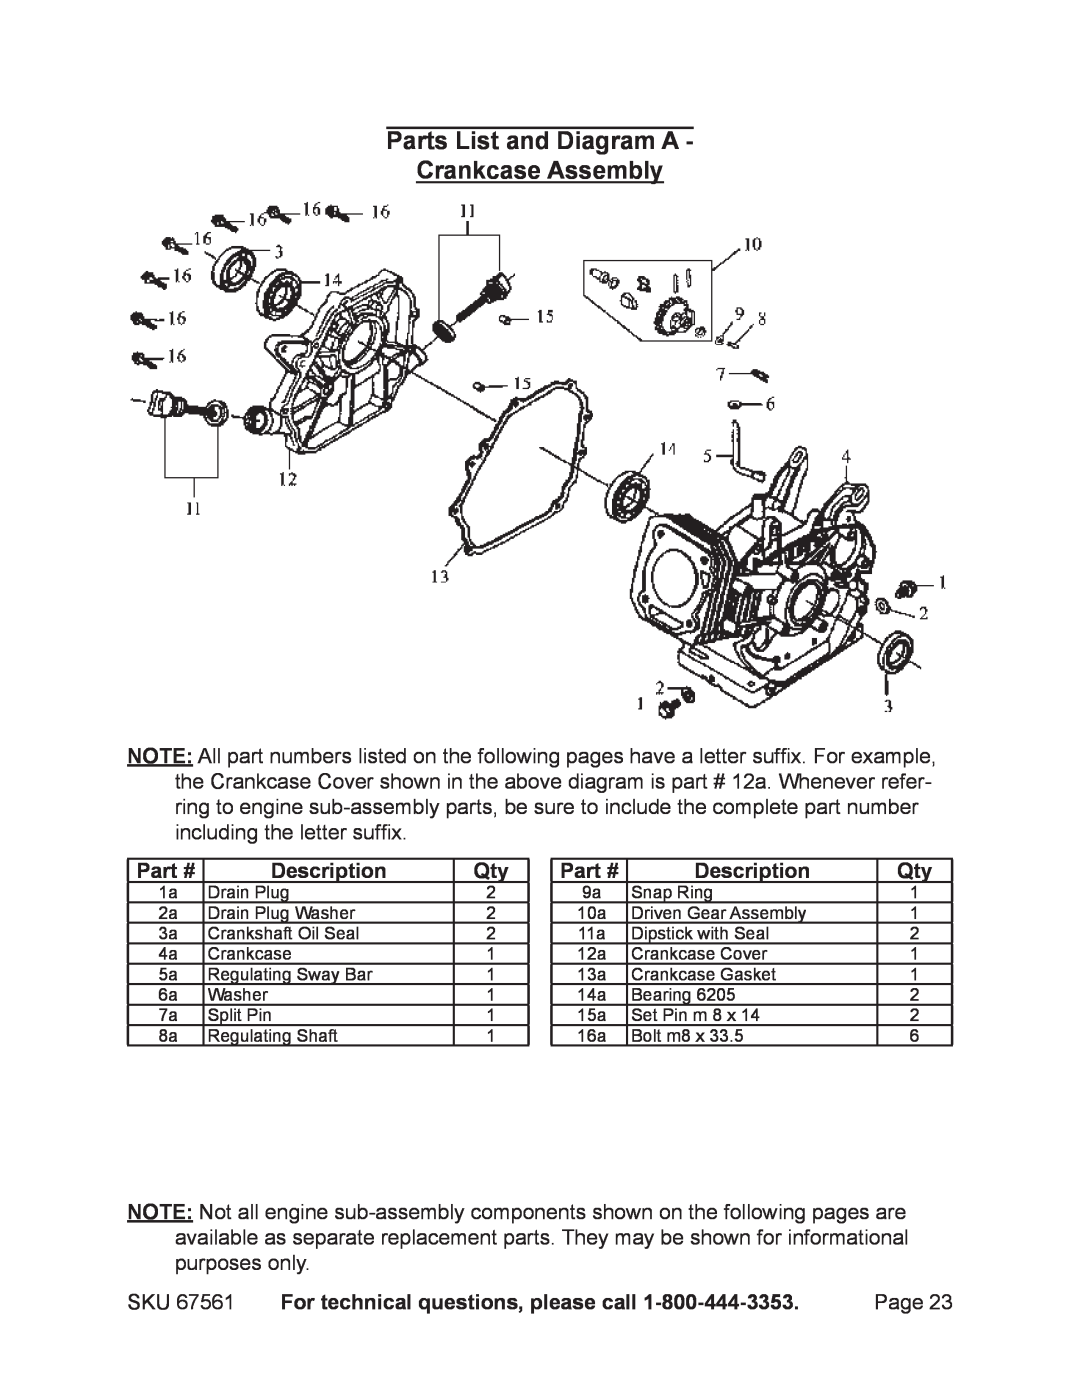 Chicago Electric 67561 Parts List and Diagram A Crankcase Assembly, Description, For technical questions, please call 